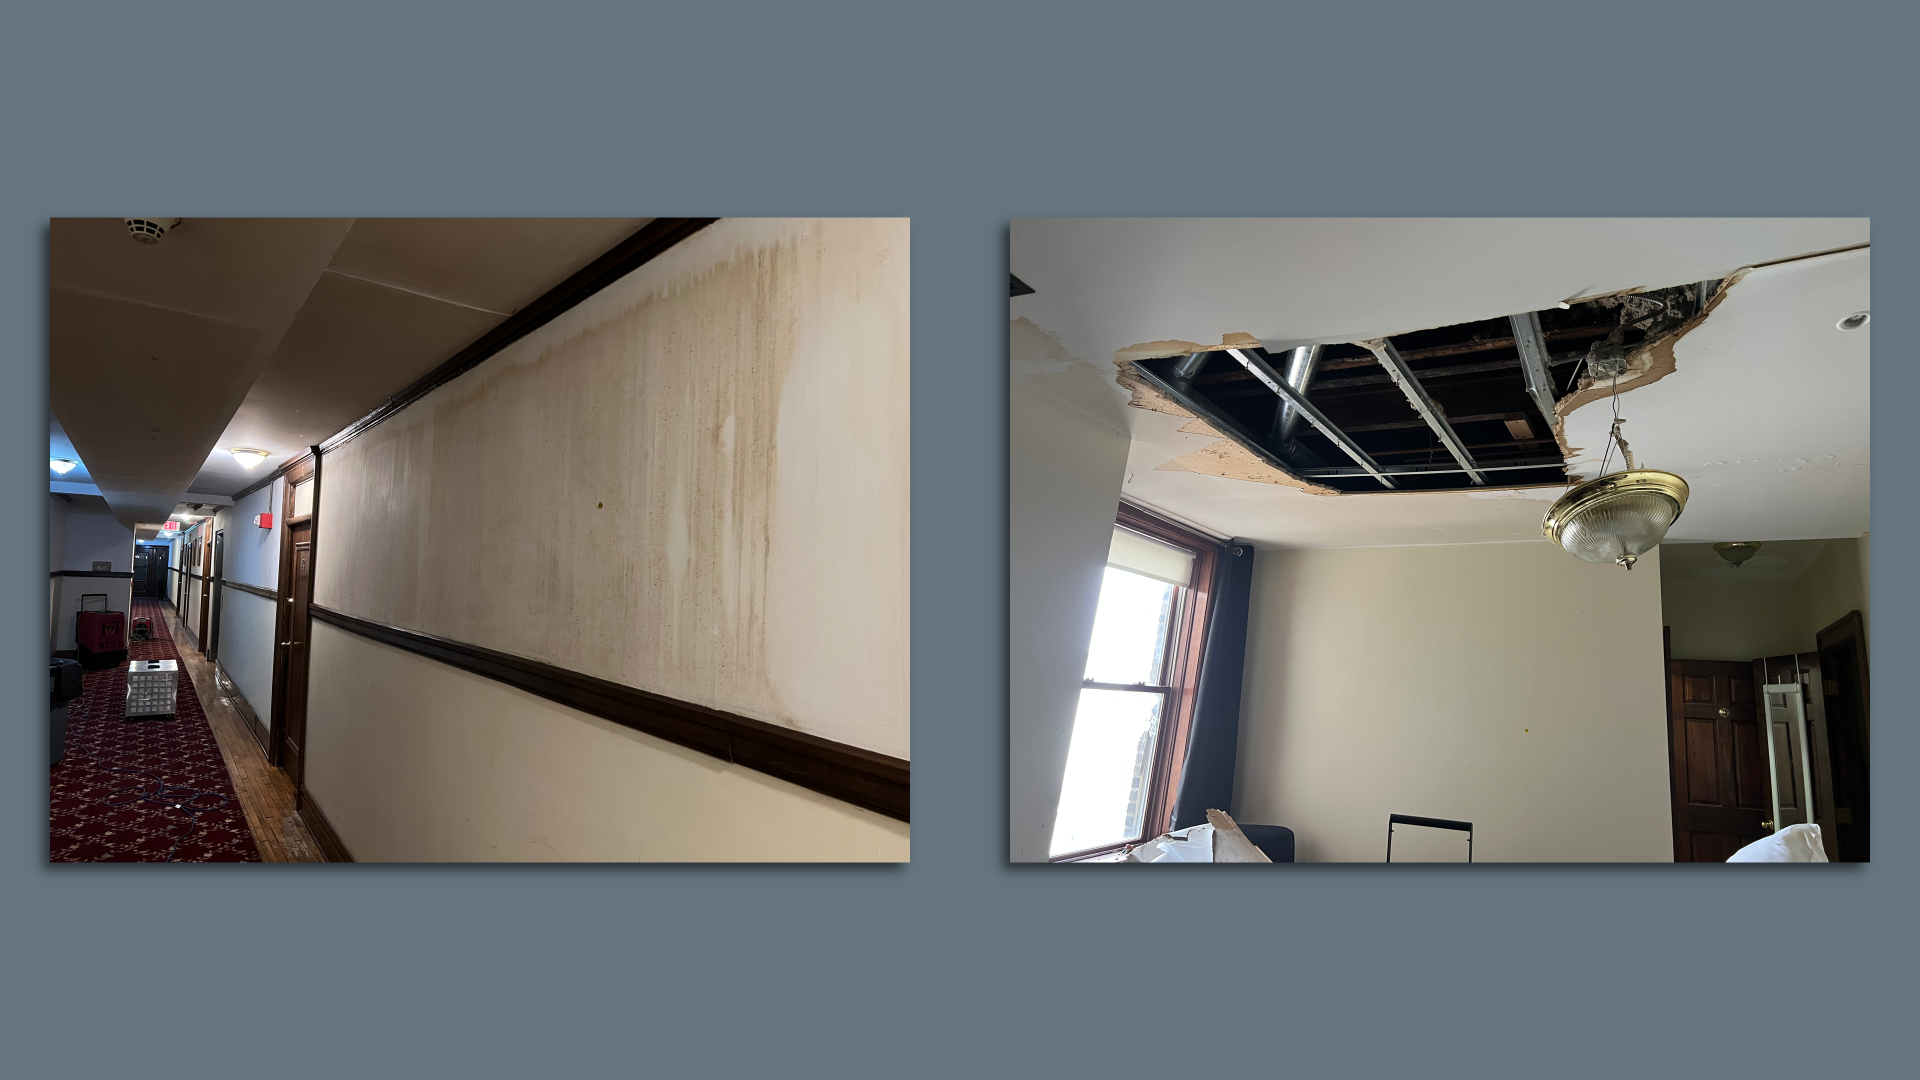 First image shows mold on walls, second image shows collapsed ceiling at the Addsion